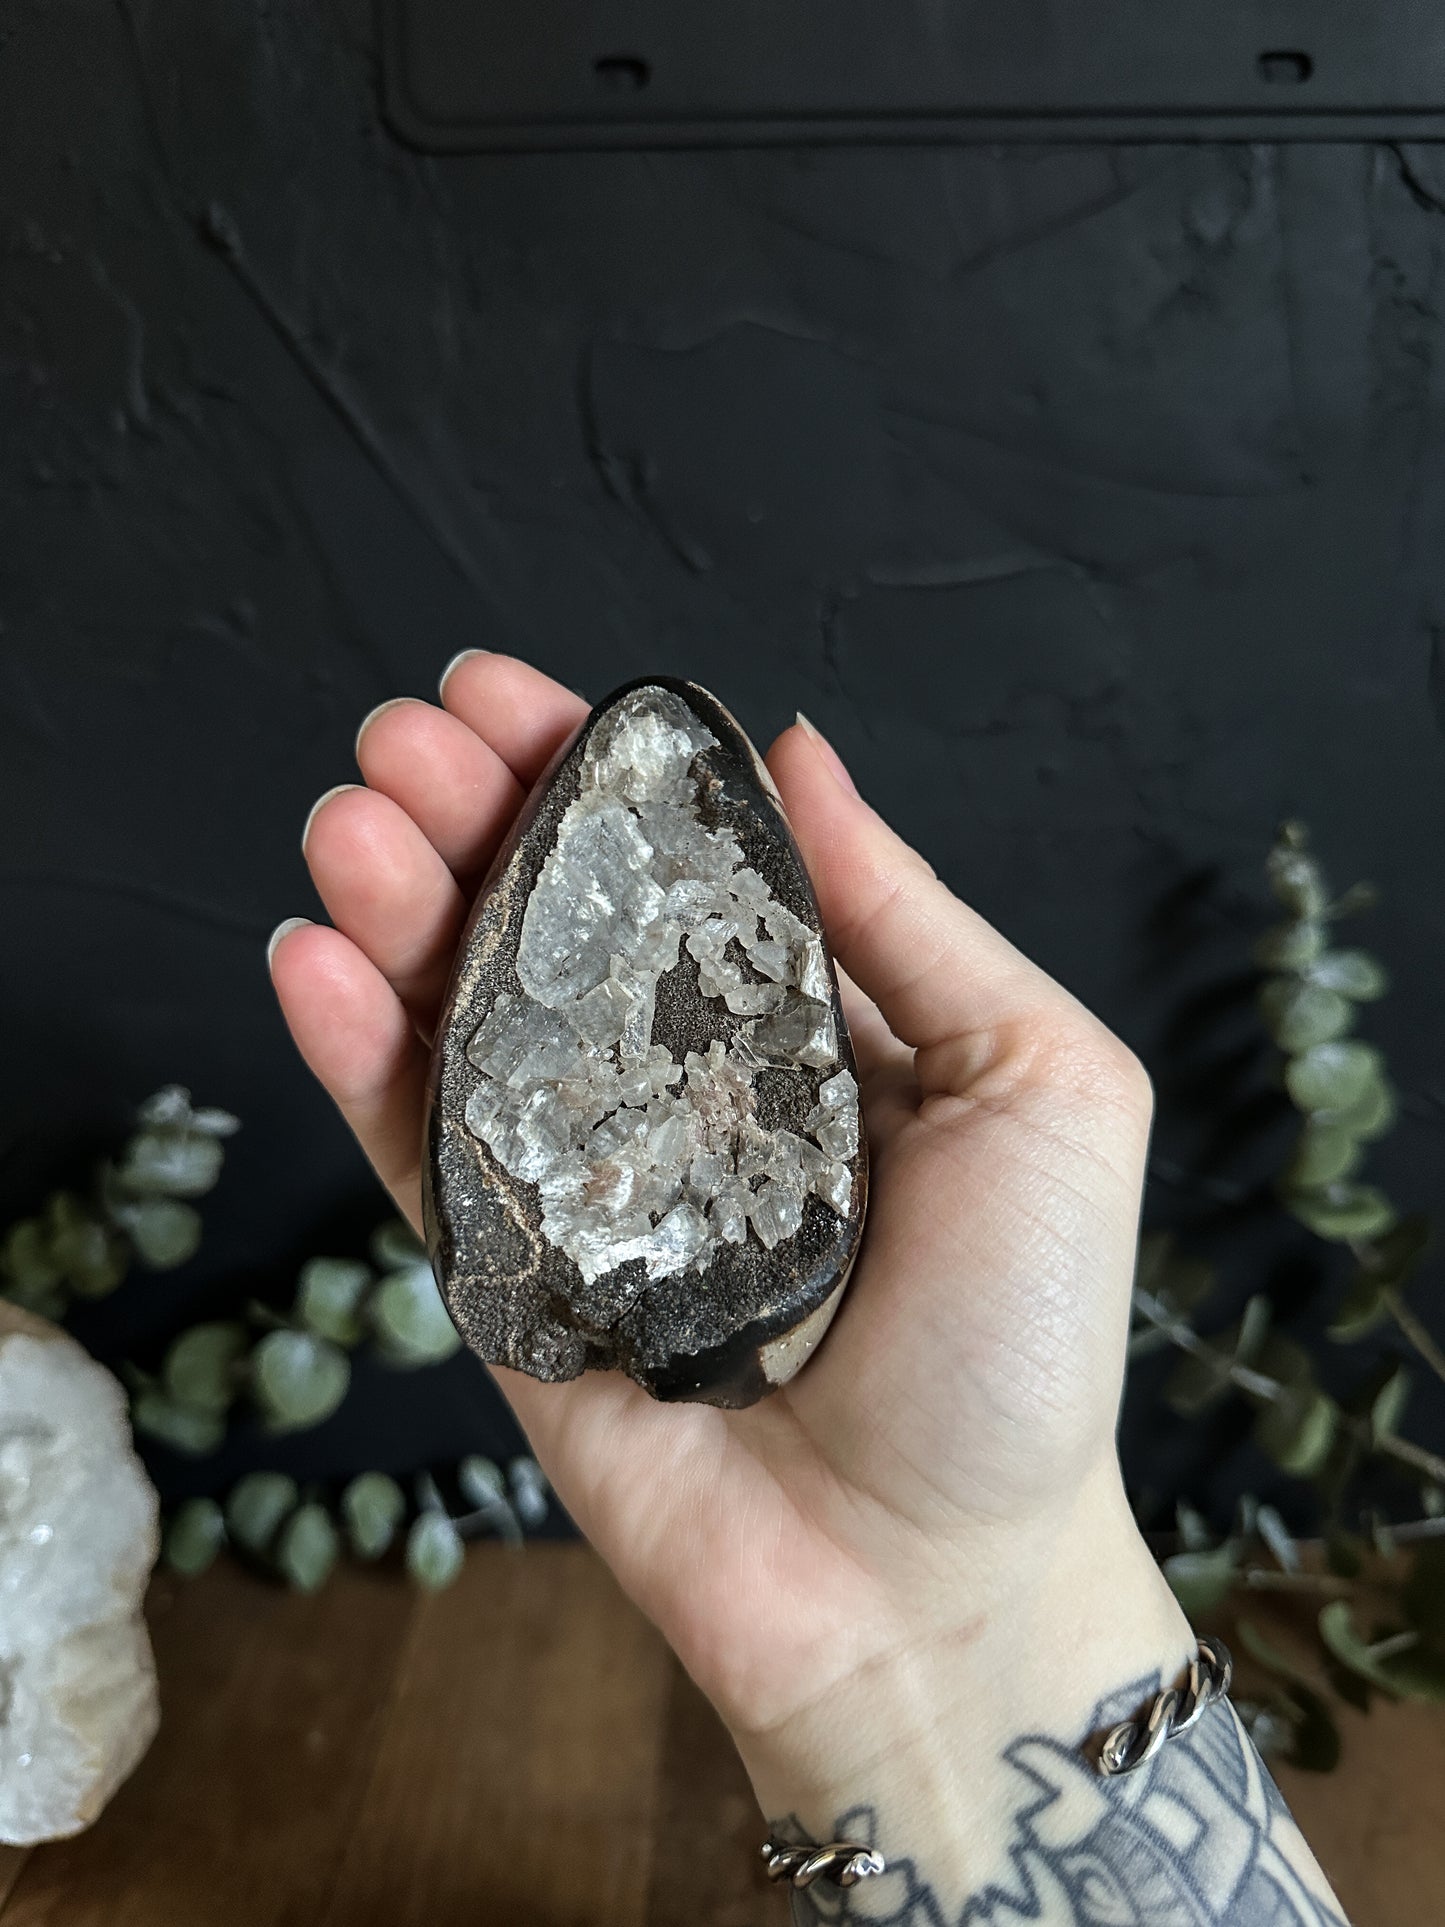 Septarian Geodes with Calcite Inclusions - Your Choice